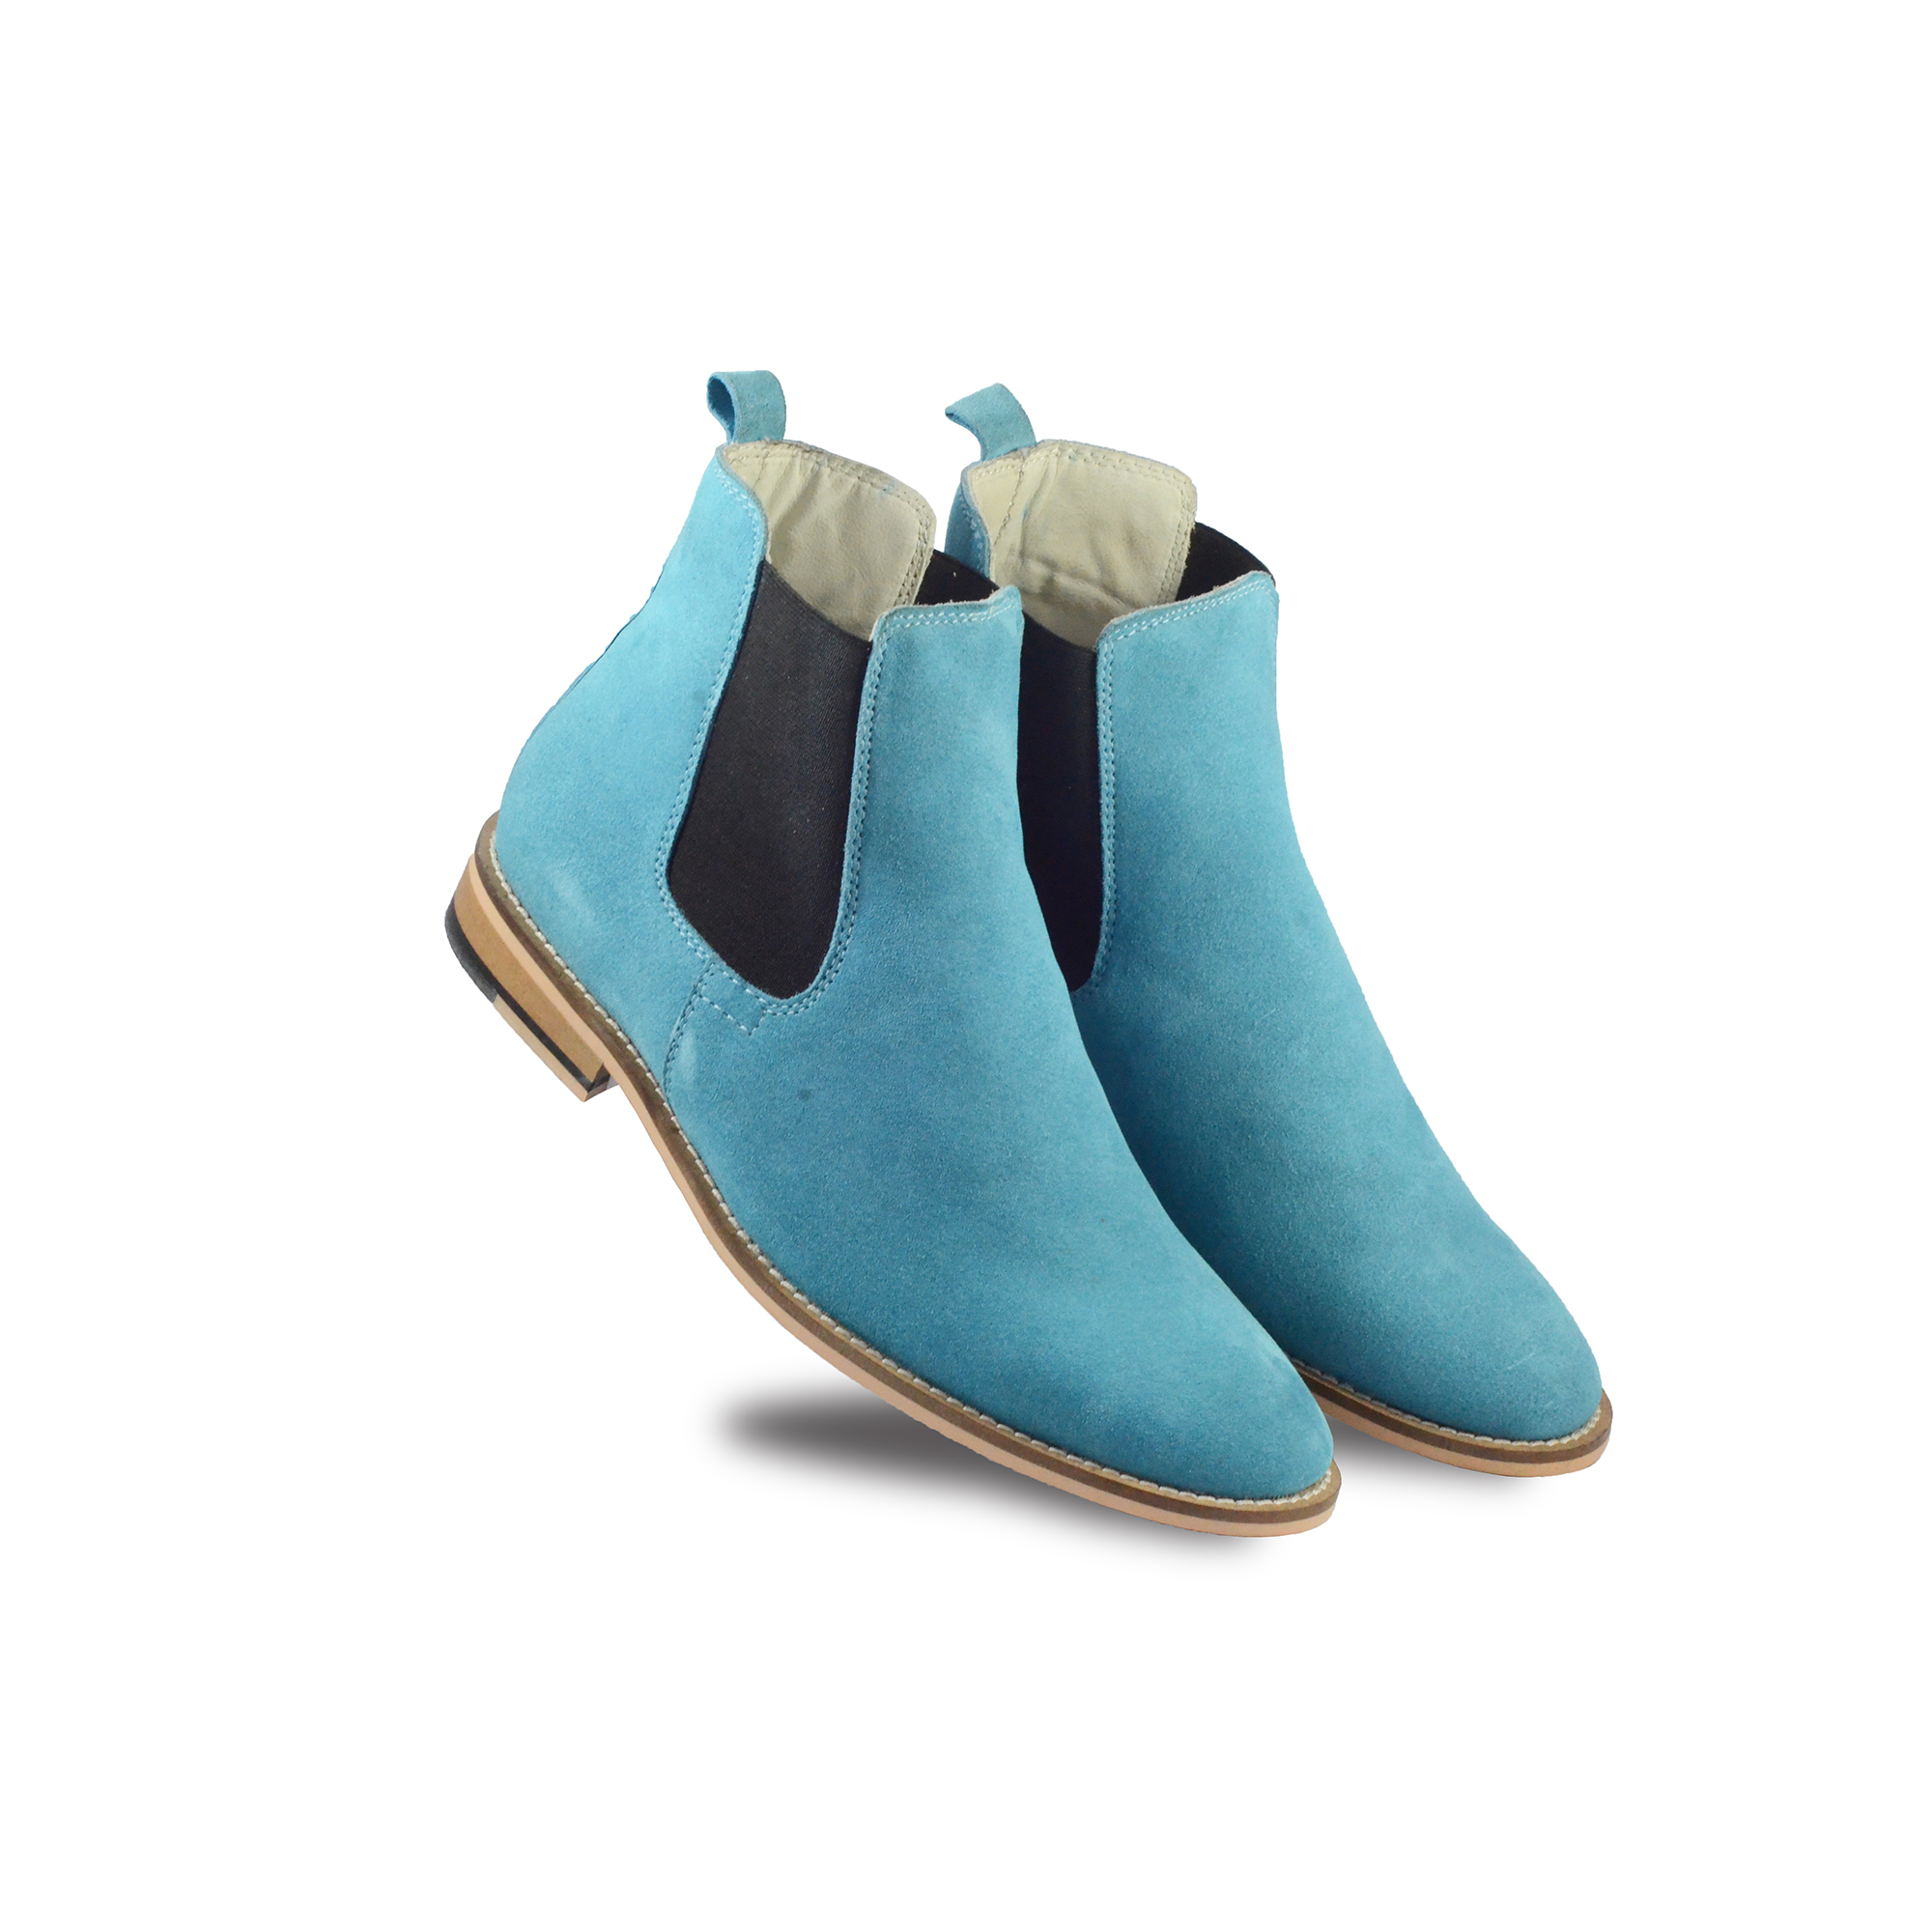 Chelsea Boots - Buy 6 inches Pure Leather Boots online at Factory Prices. | Agra Shoe Mart